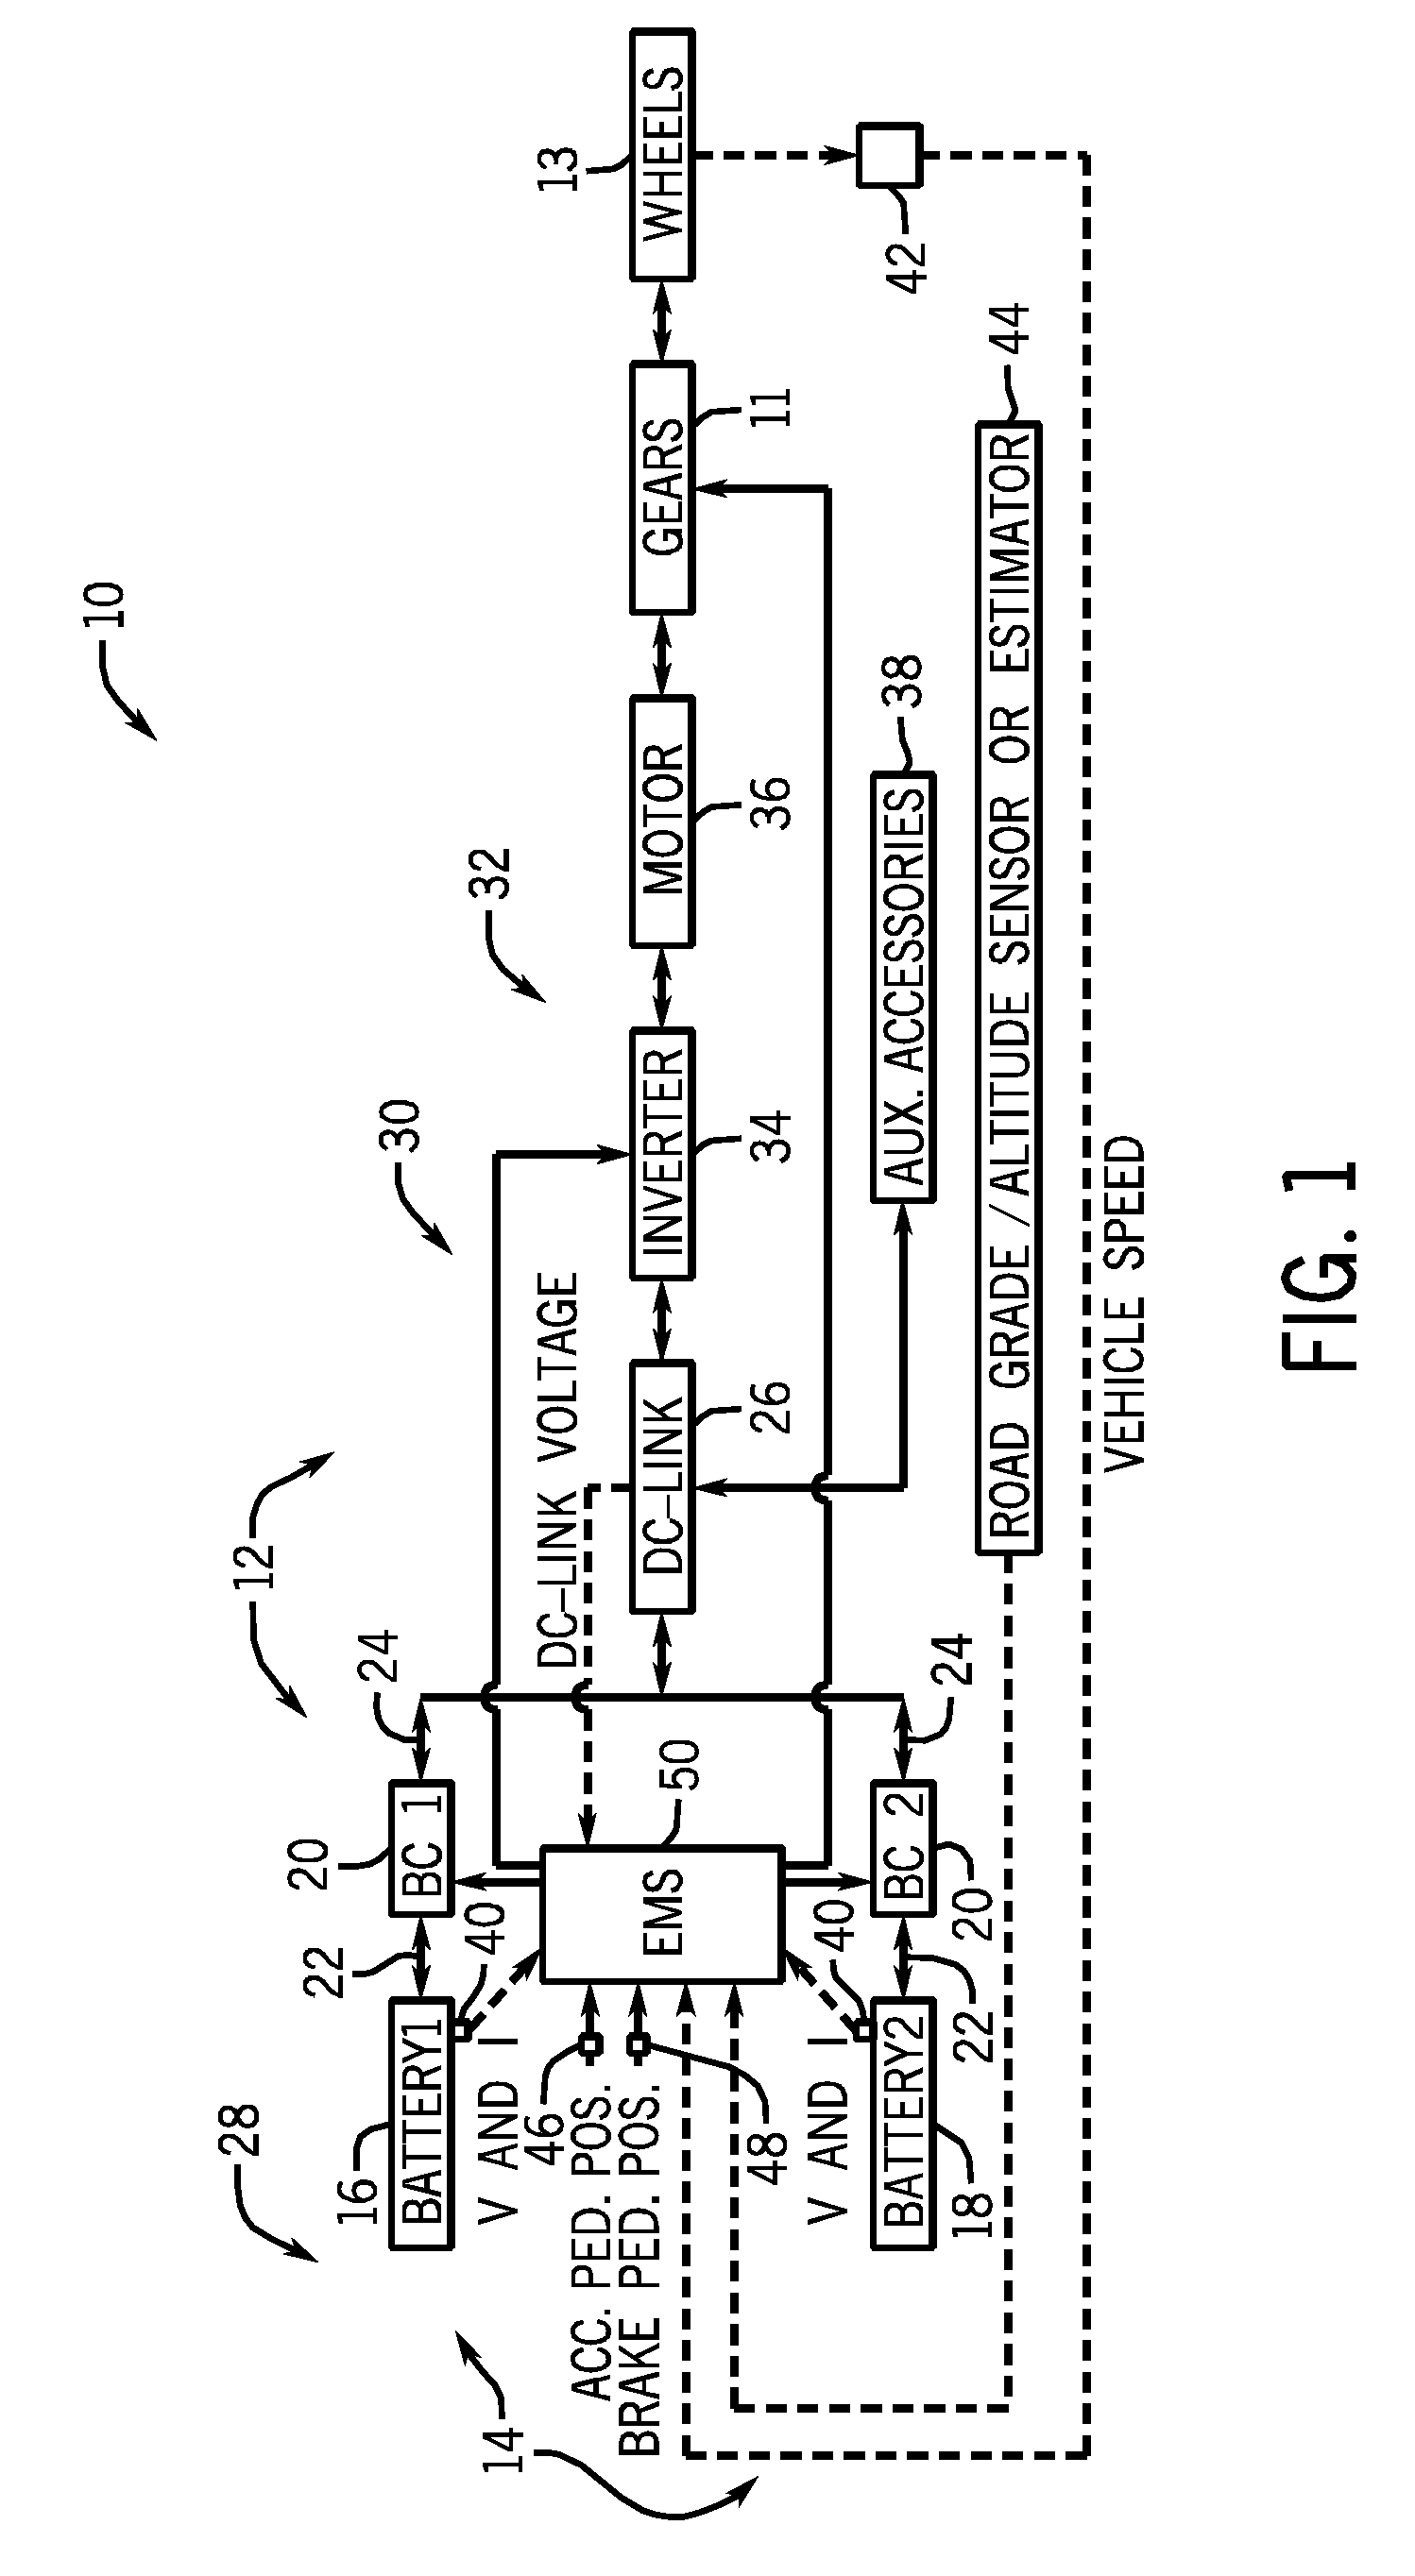 System and method for energy management in an electric vehicle